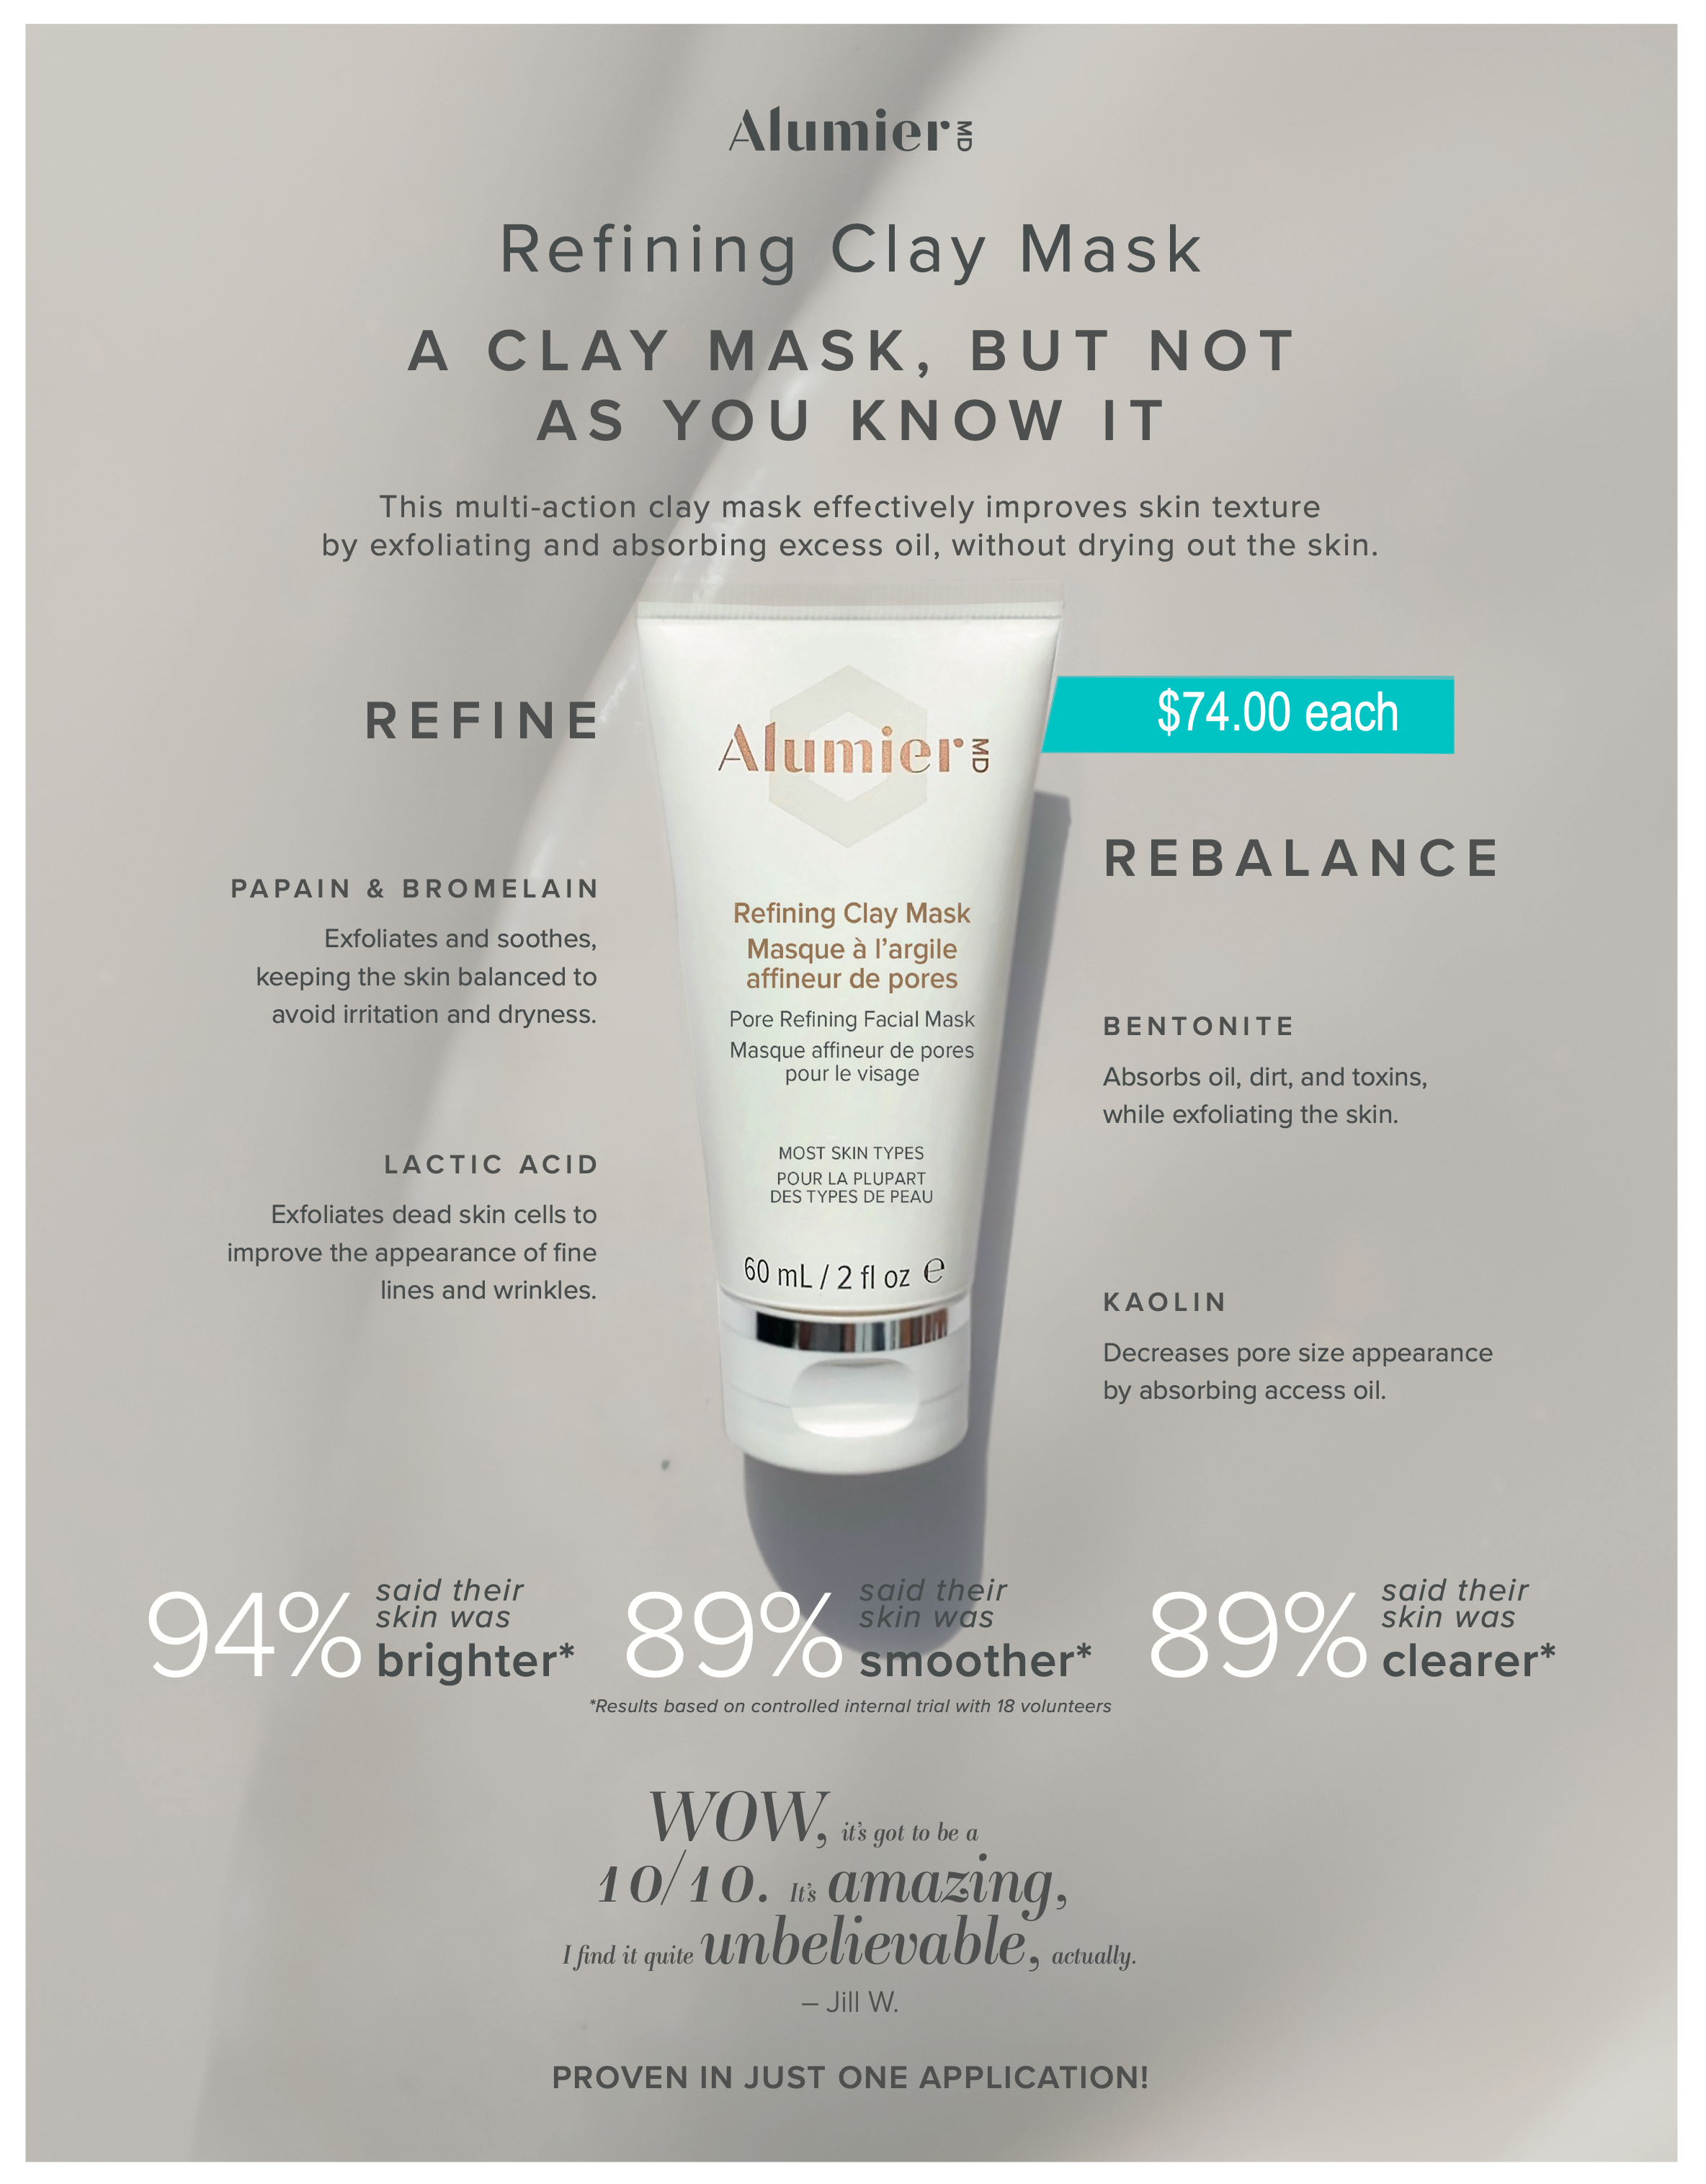 Refining Clay Mask Promotion